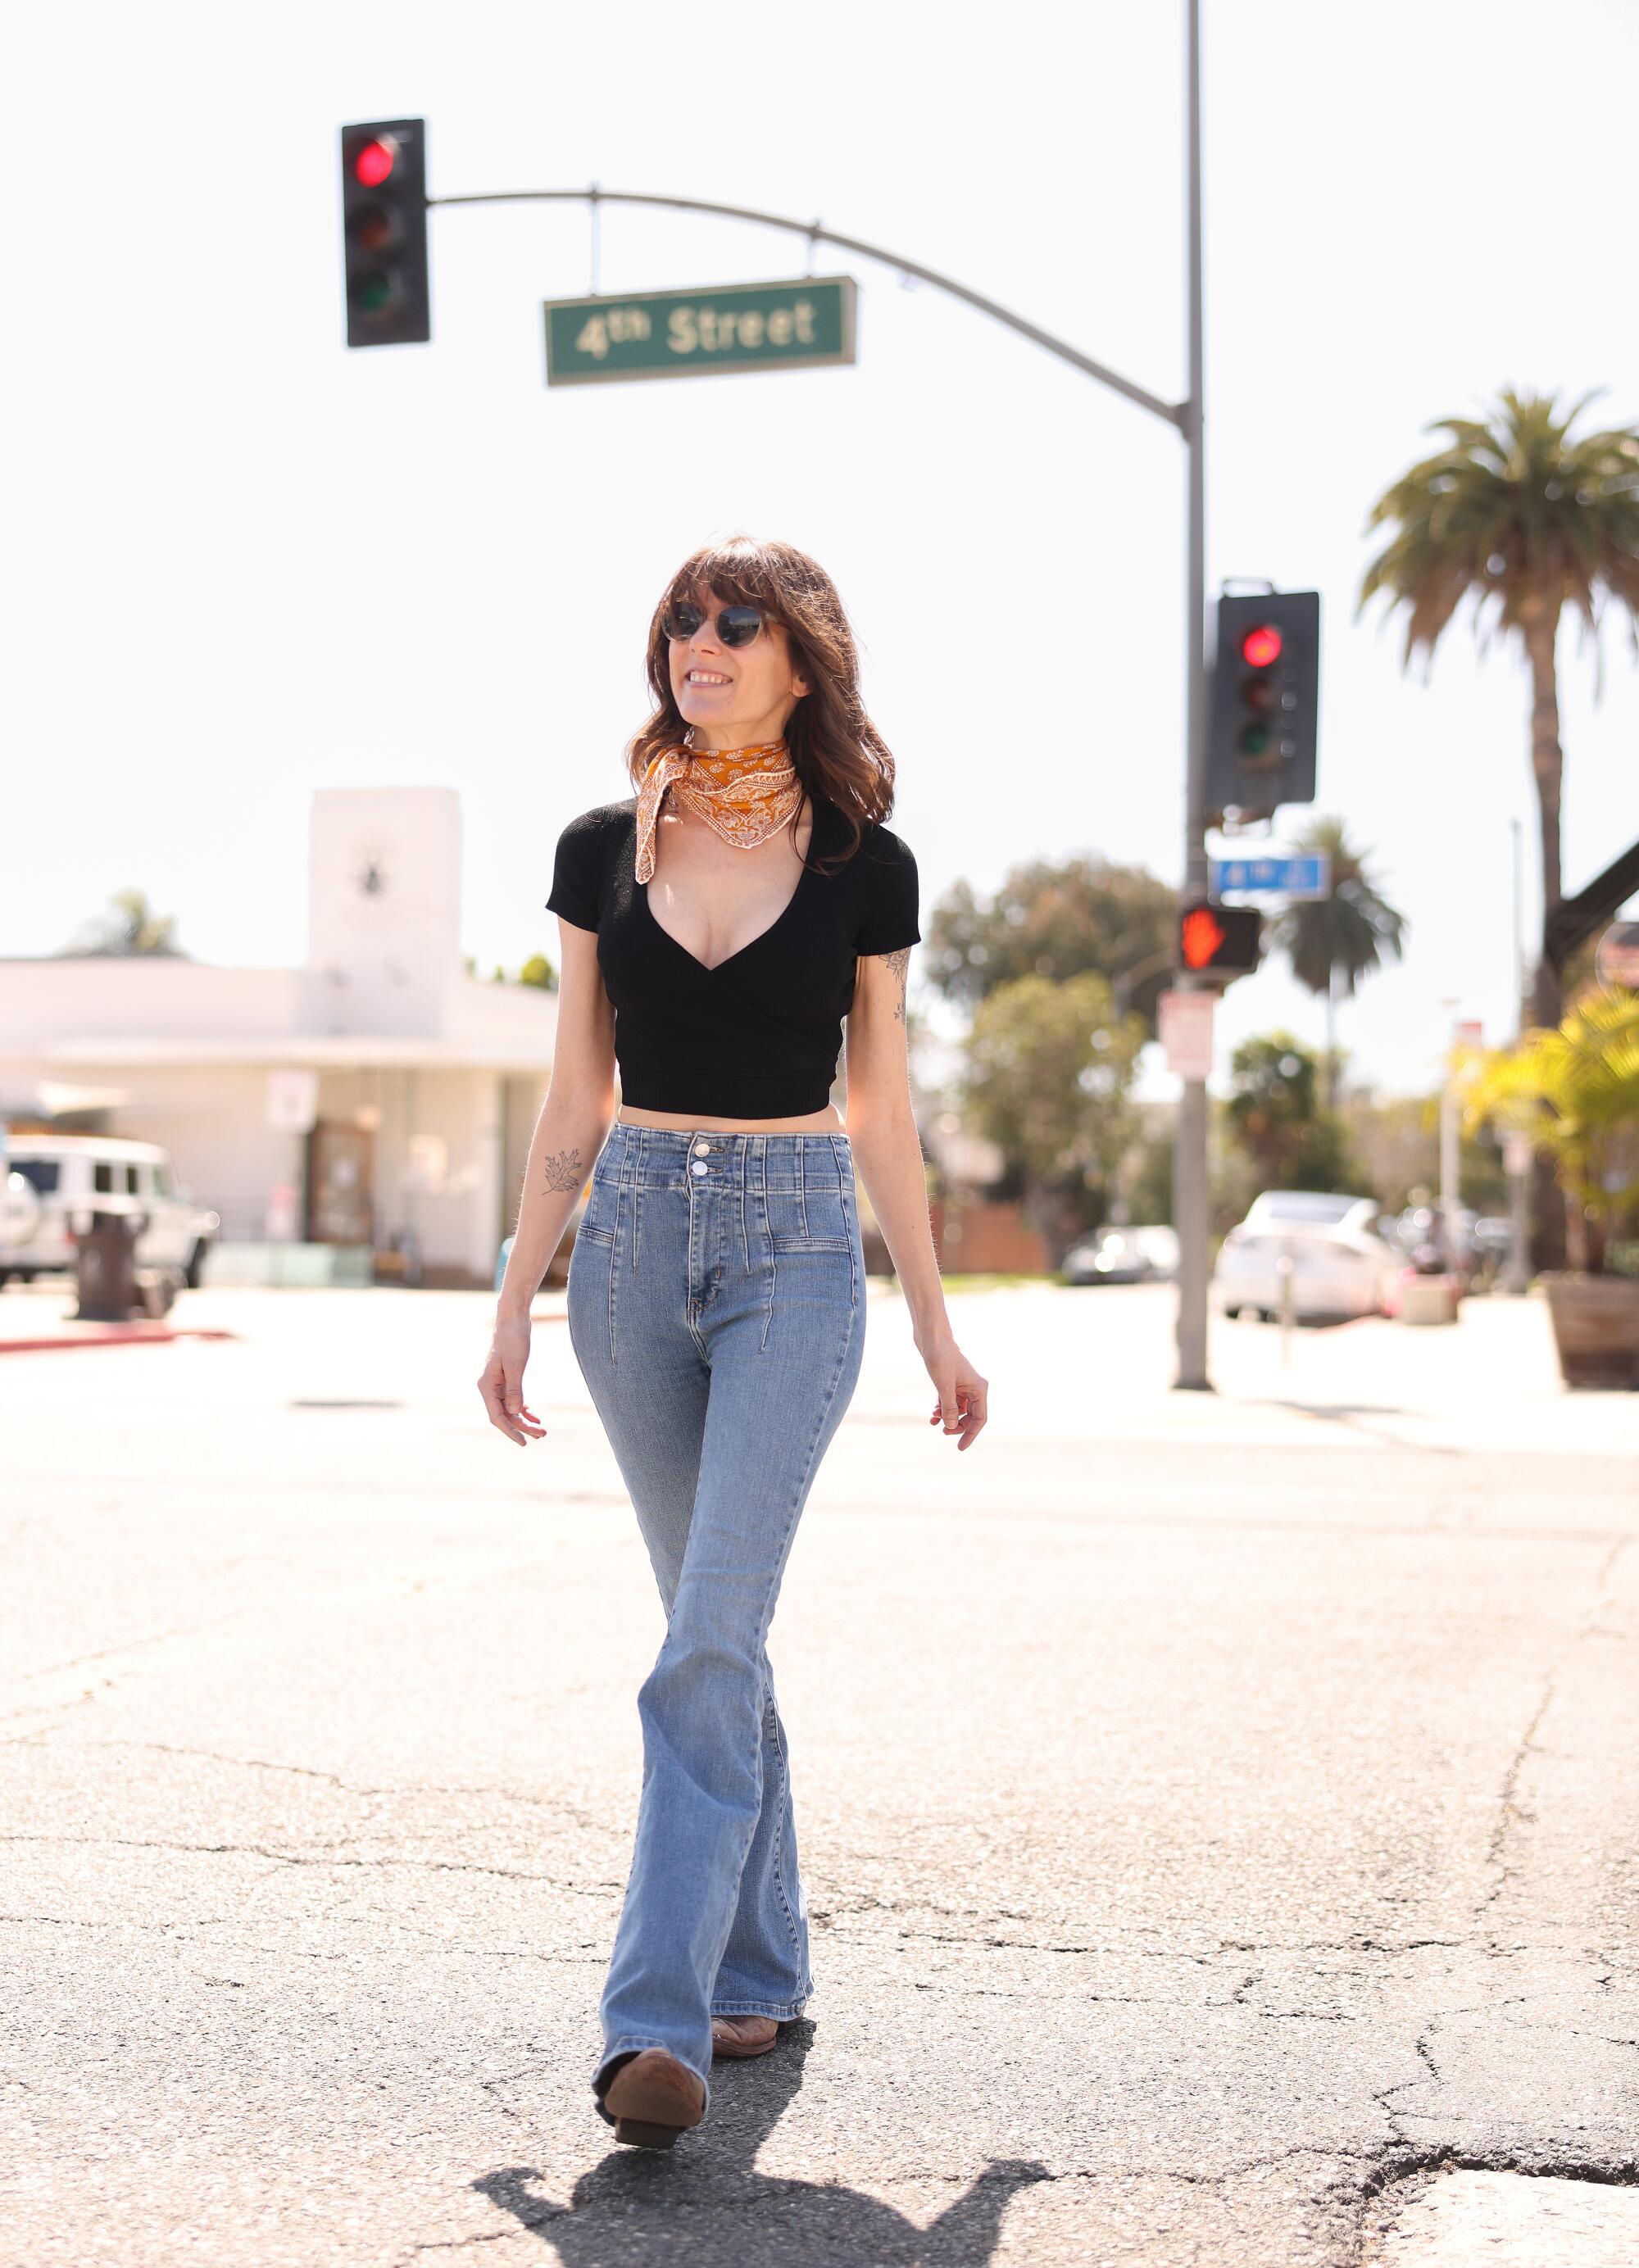 Harrison crosses a street in jeans and a black top.